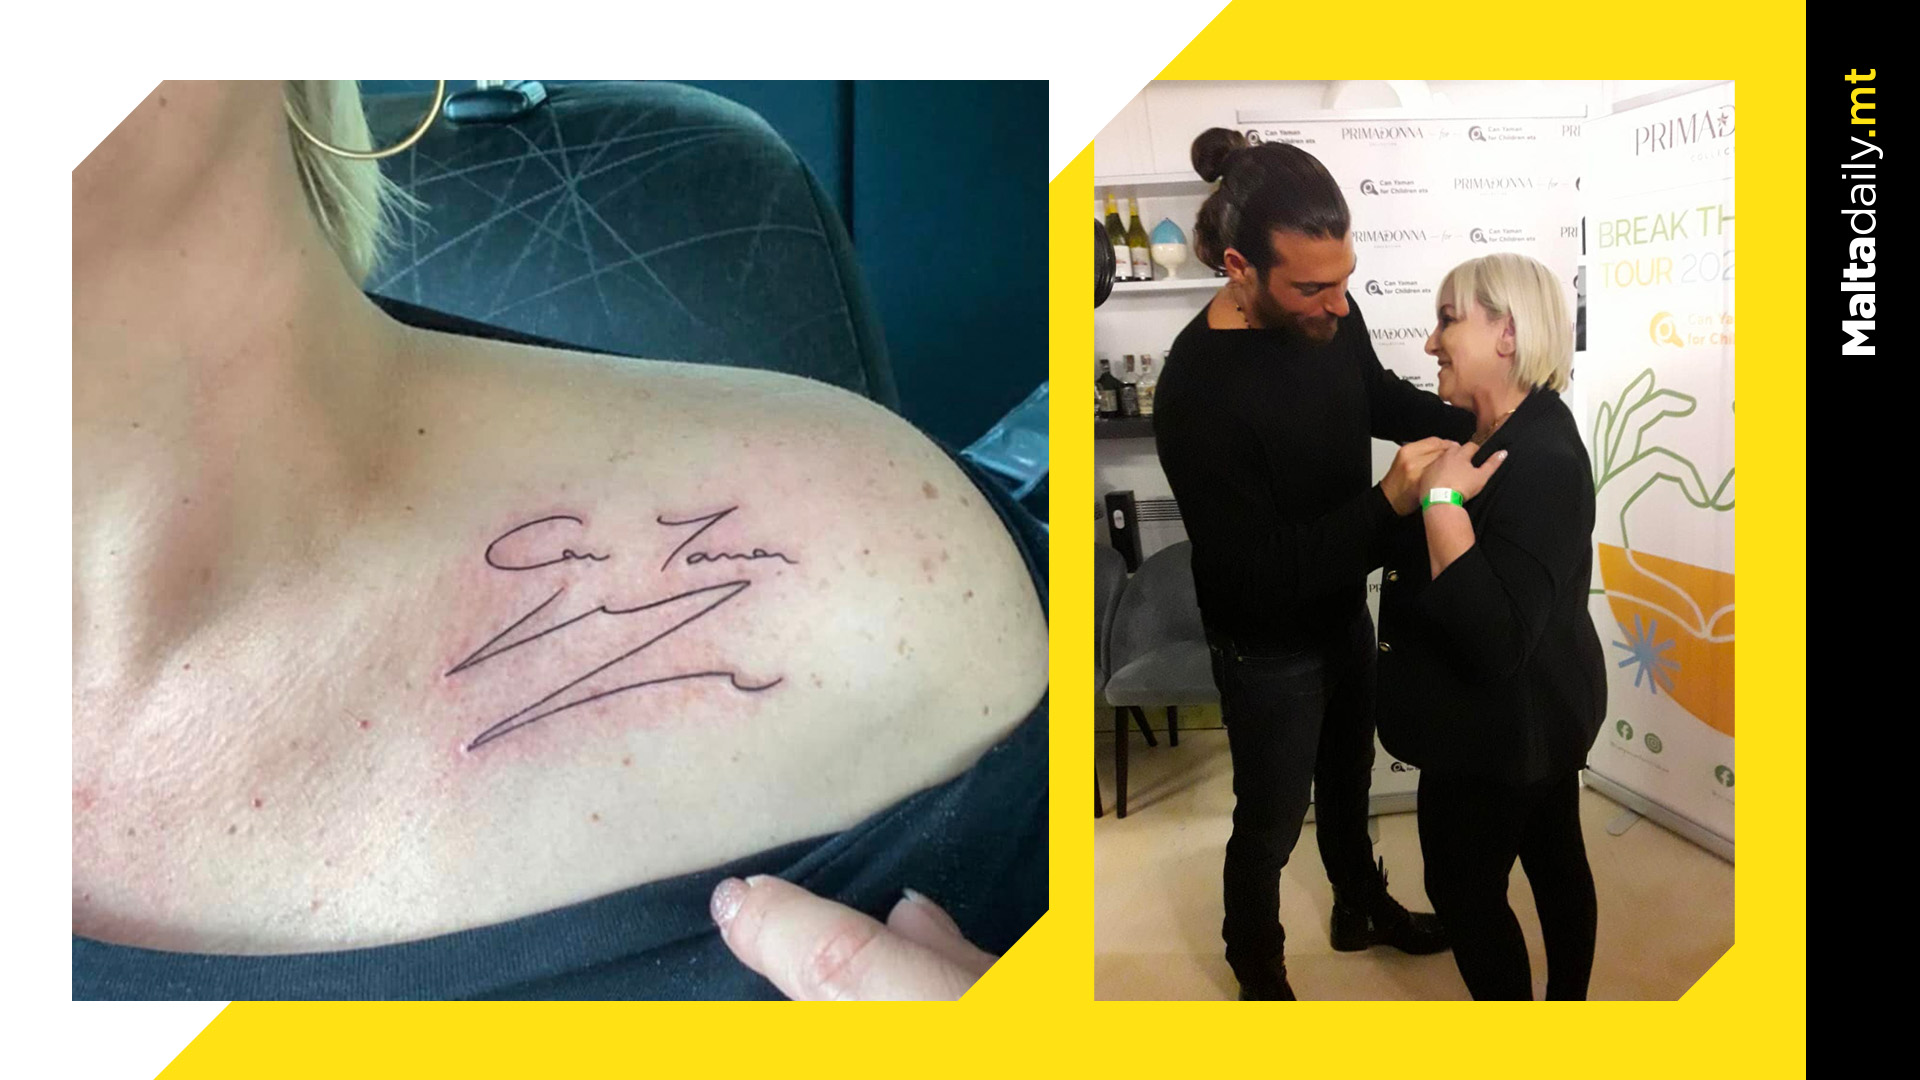 Woman tattoos Can Yaman's signature after meeting Turkish series star